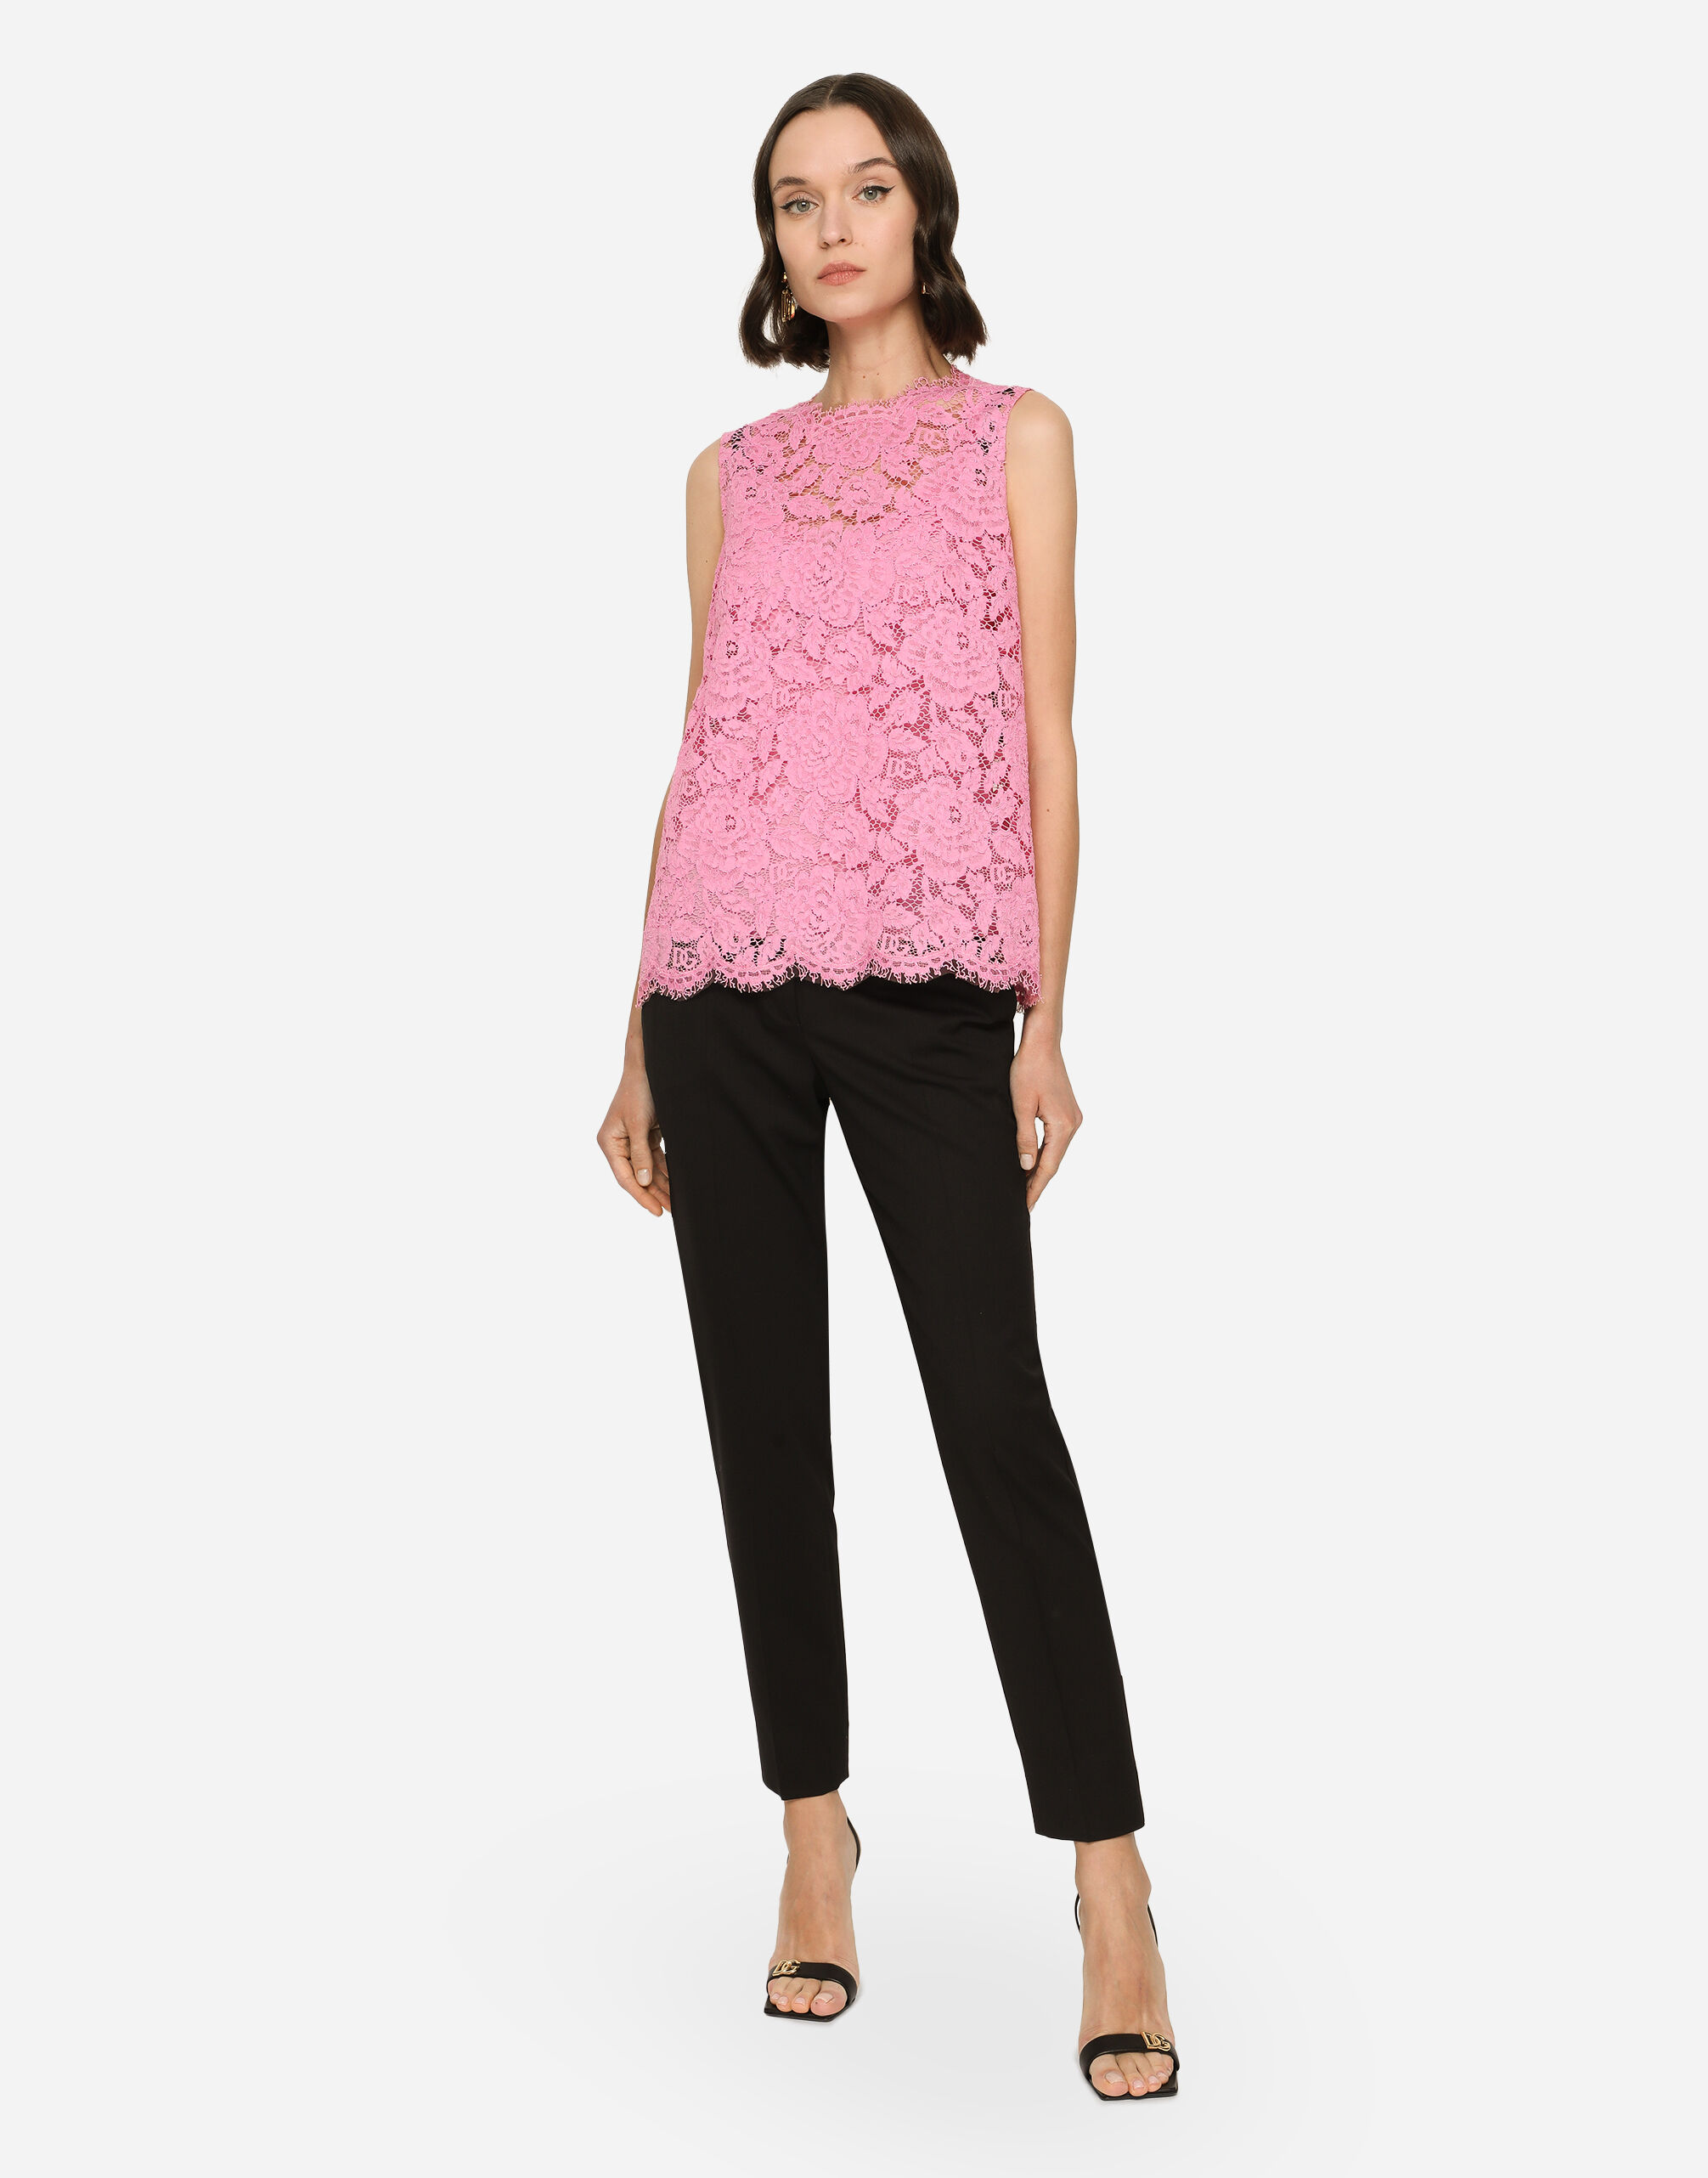 Branded stretch lace top in Pink for | Dolce&Gabbana® US